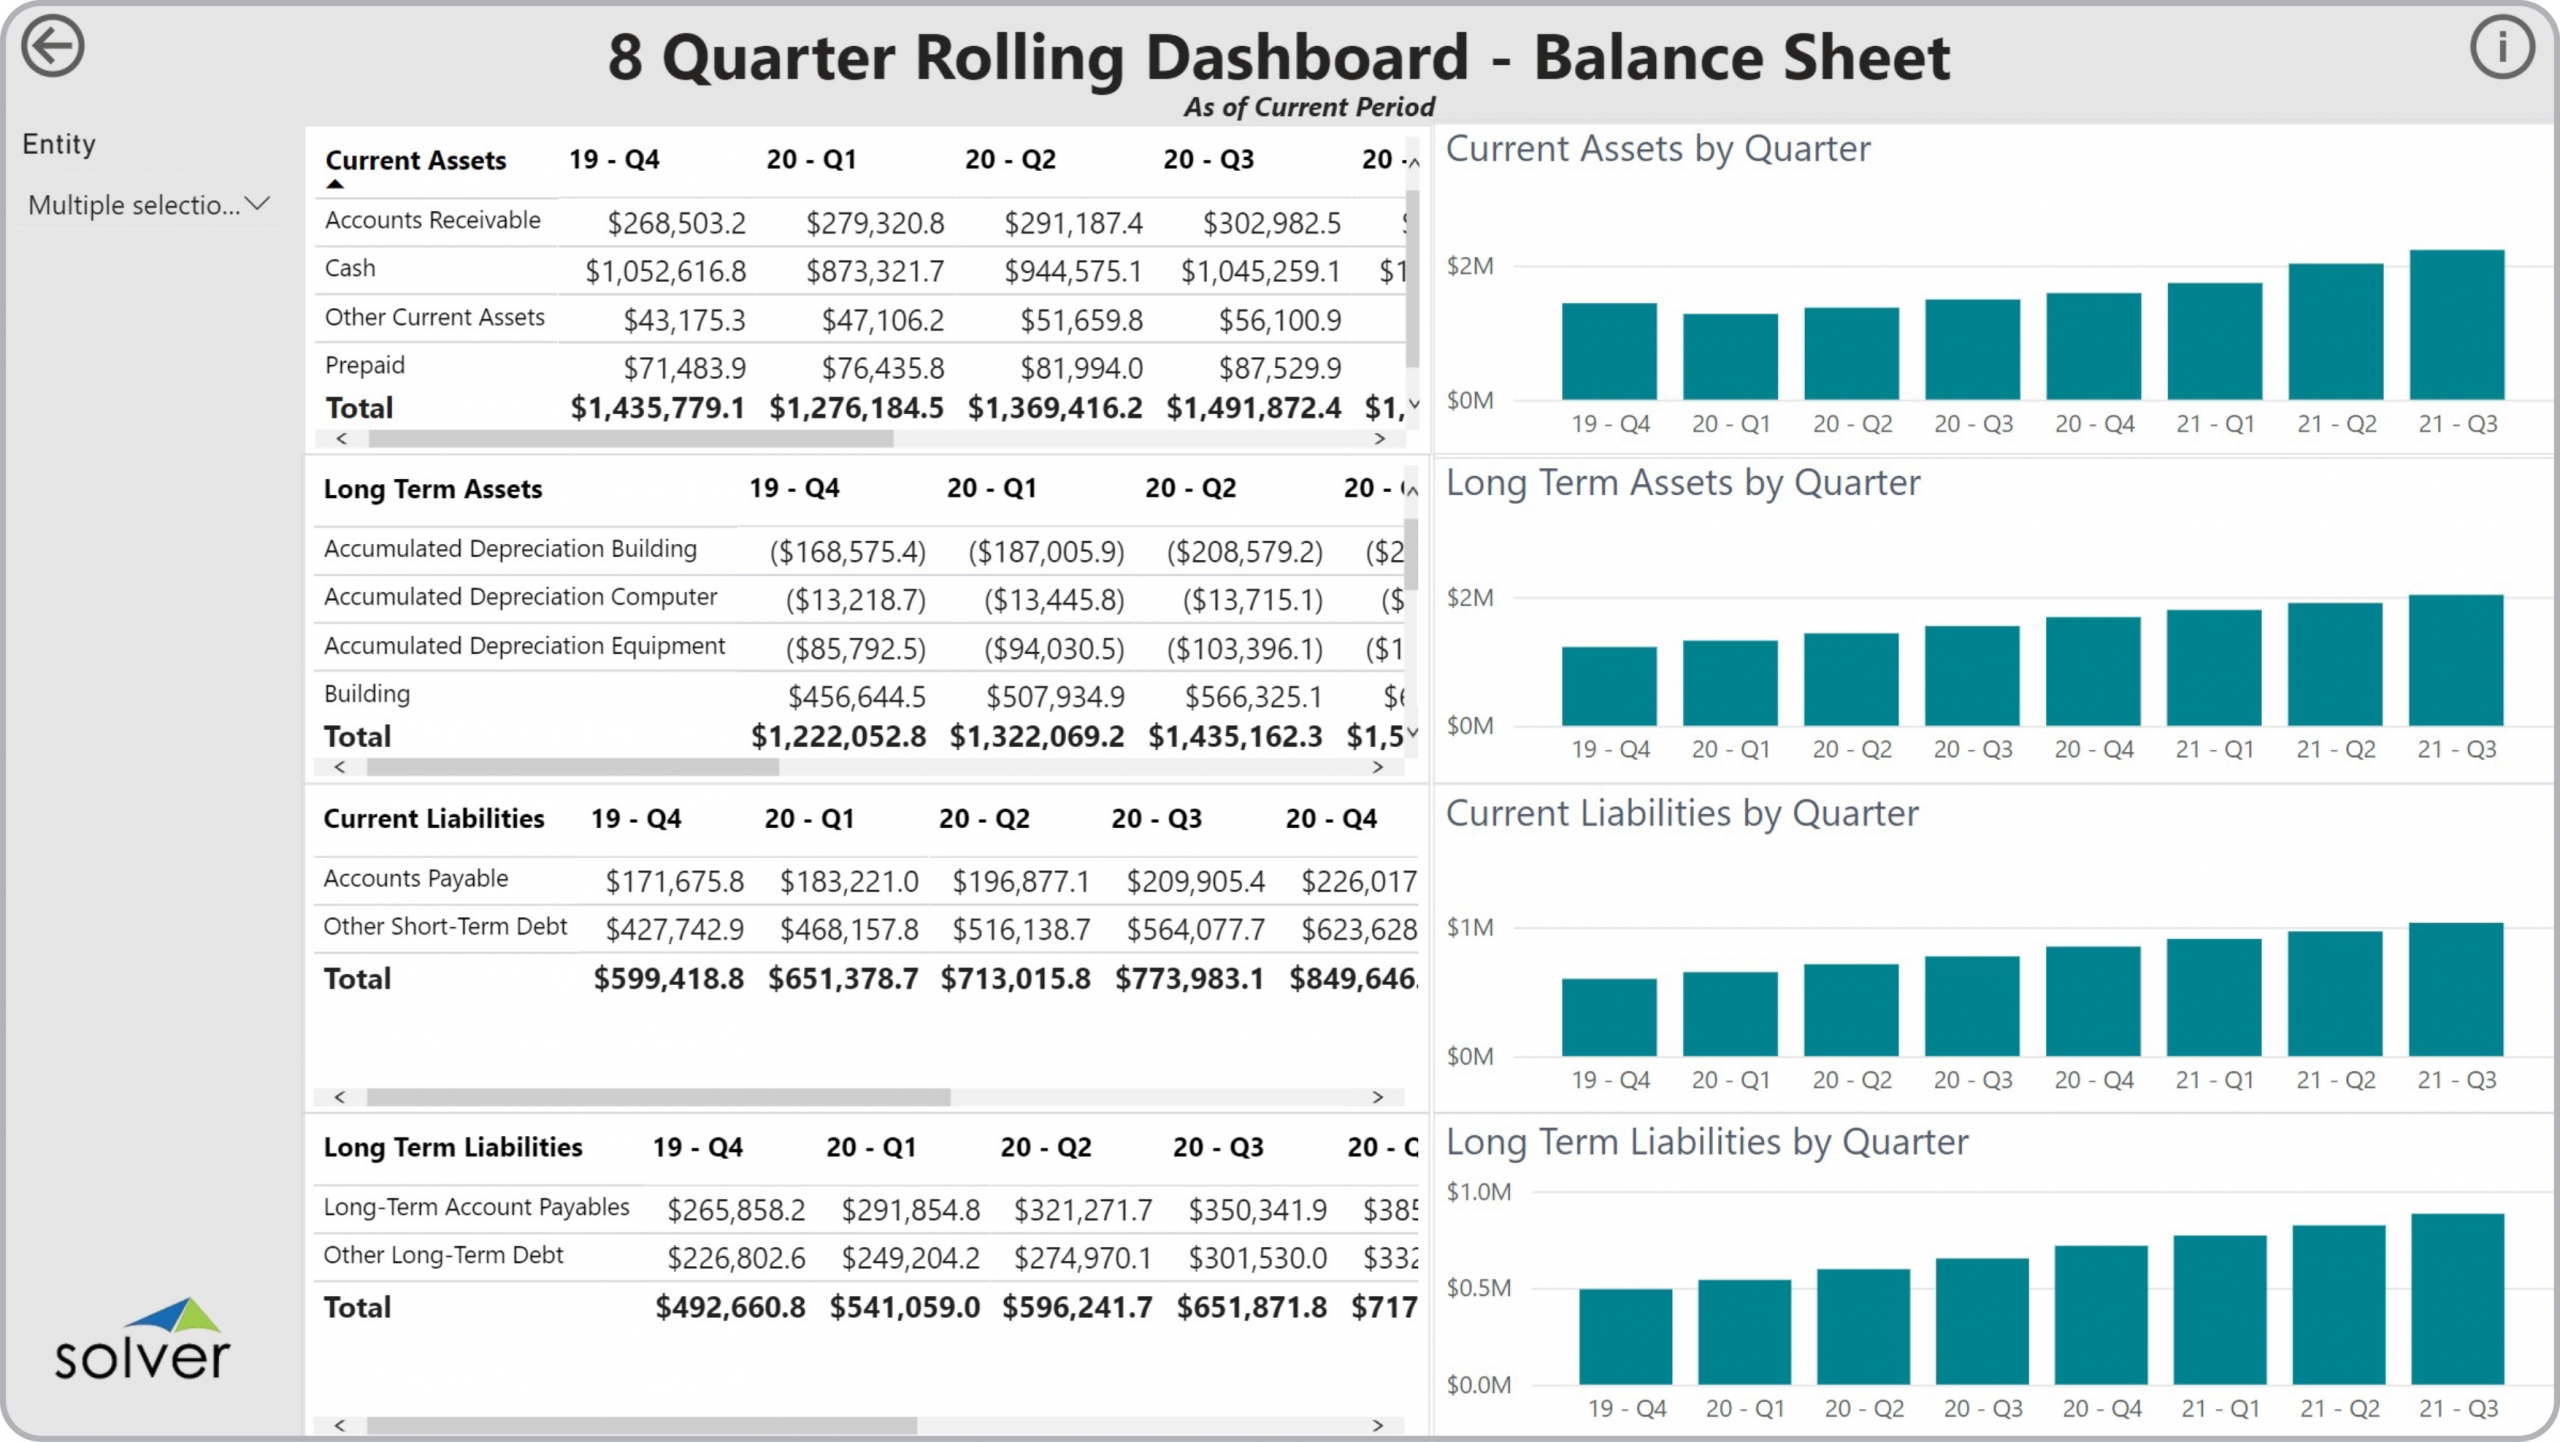 Example of an 8 Quarter Rolling Balance Sheet Dashboard to Streamline the Monthly Reporting Process